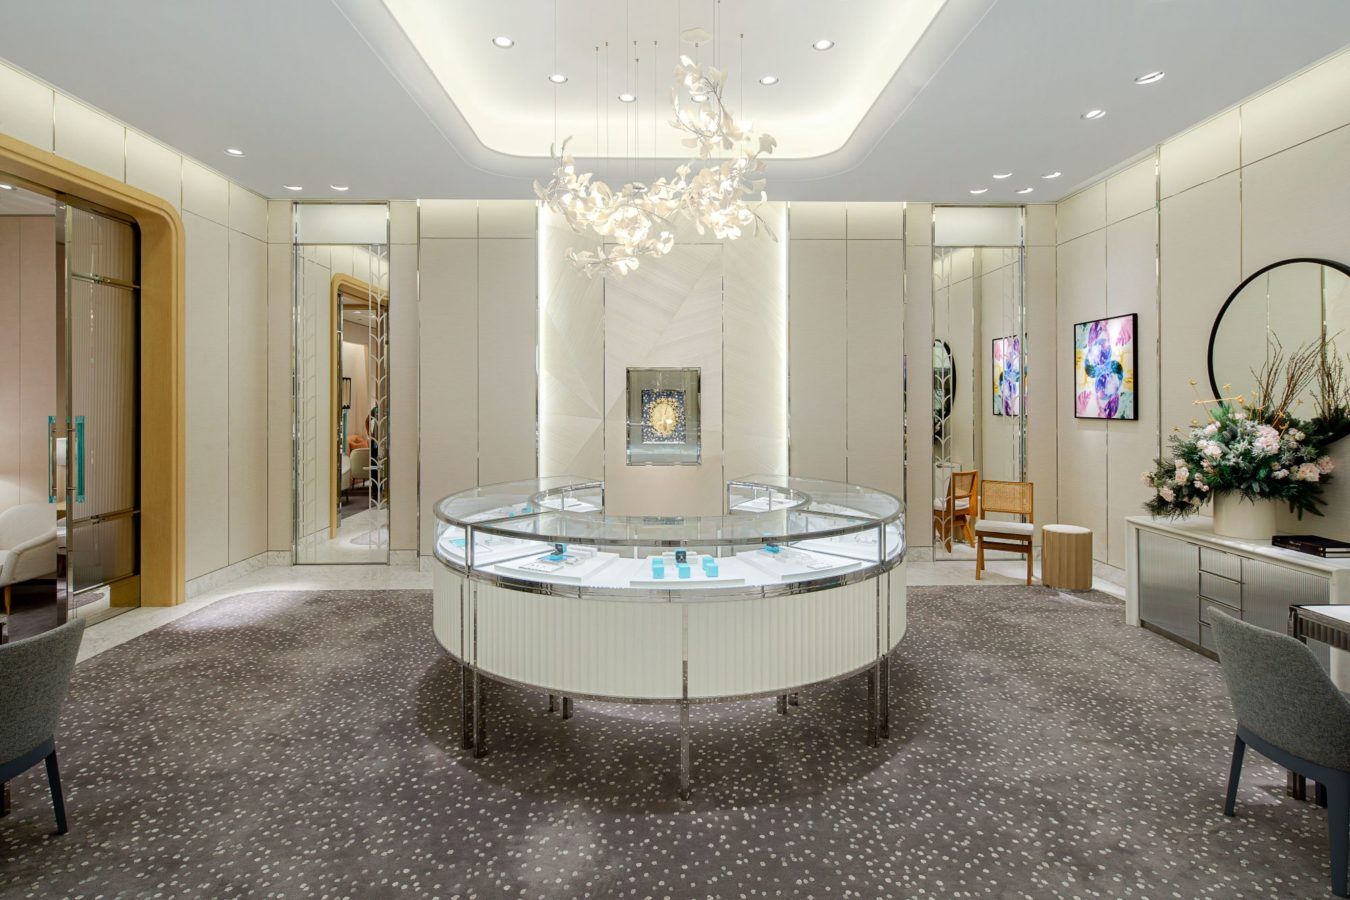 Inside Tiffany & Co's new boutique at The Gardens Mall, Kuala Lumpur